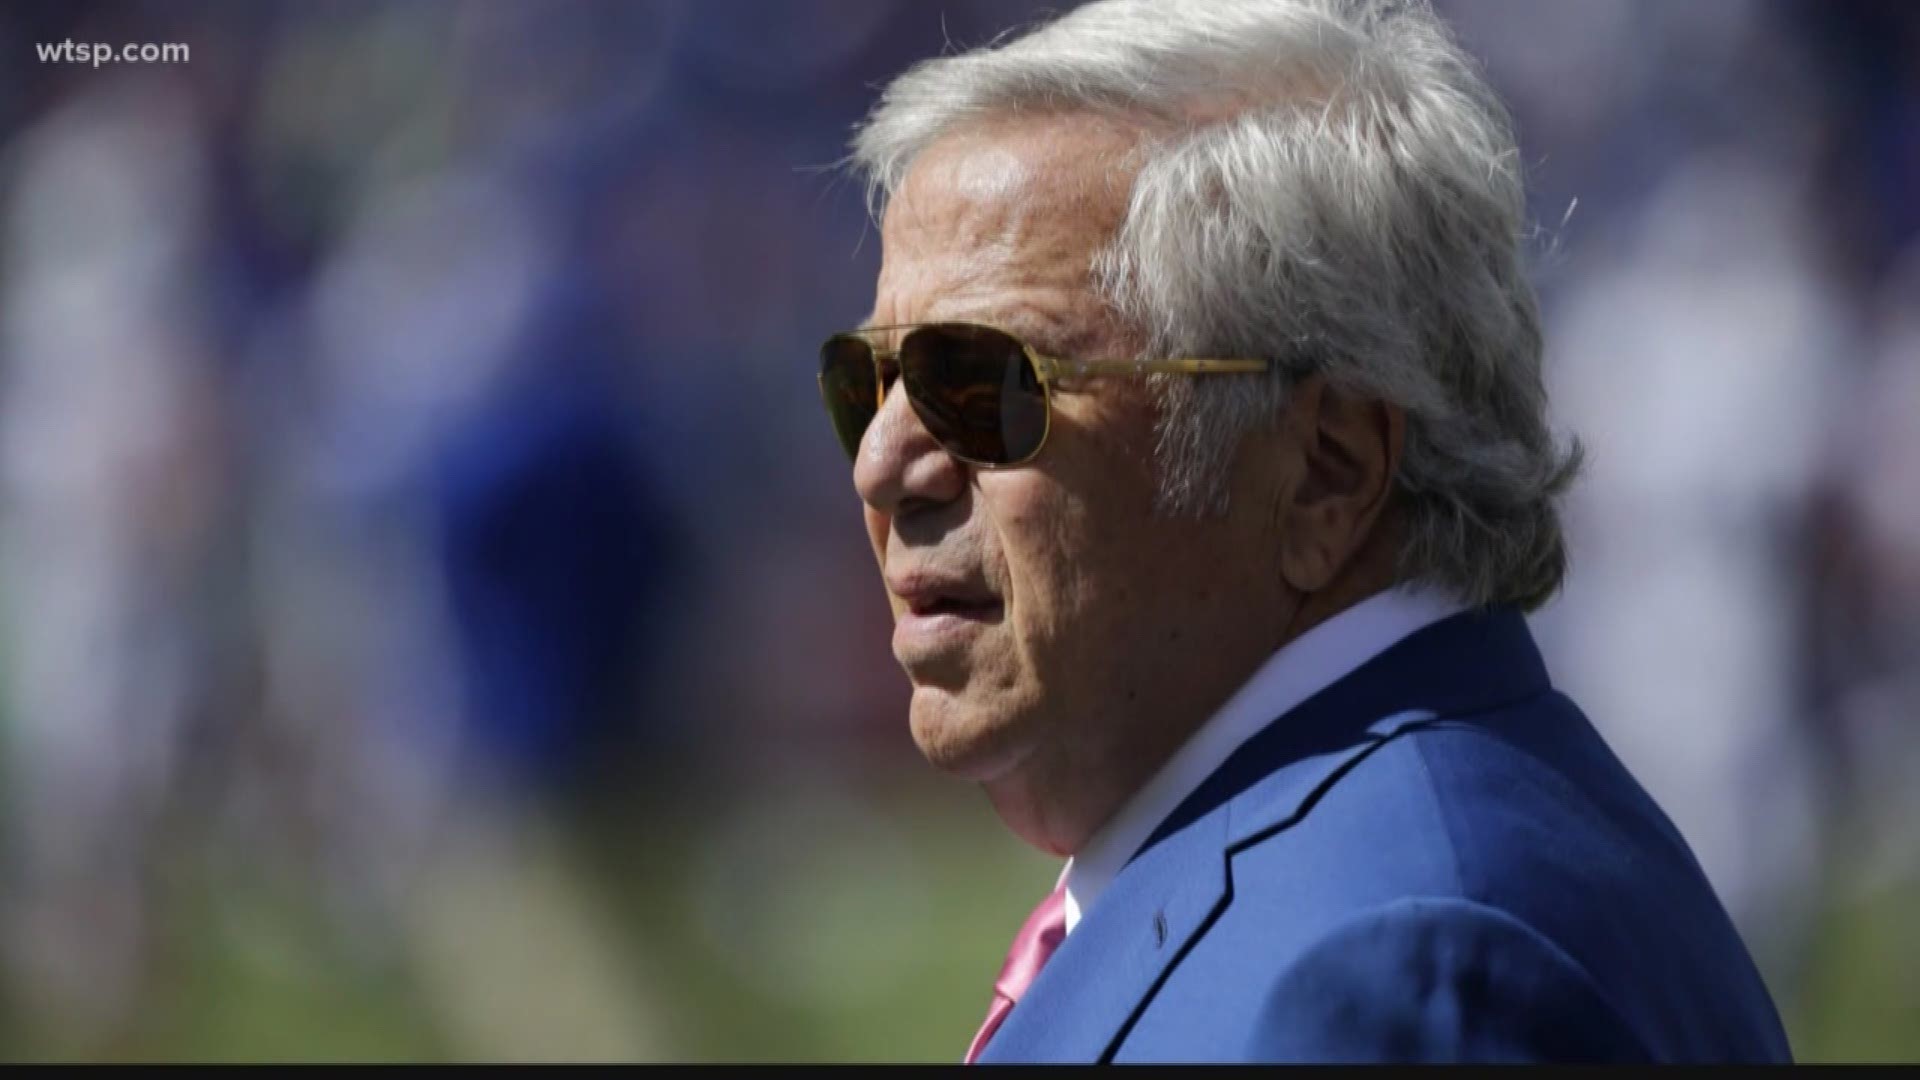 Kraft would have to plead guilty to accept the deal.